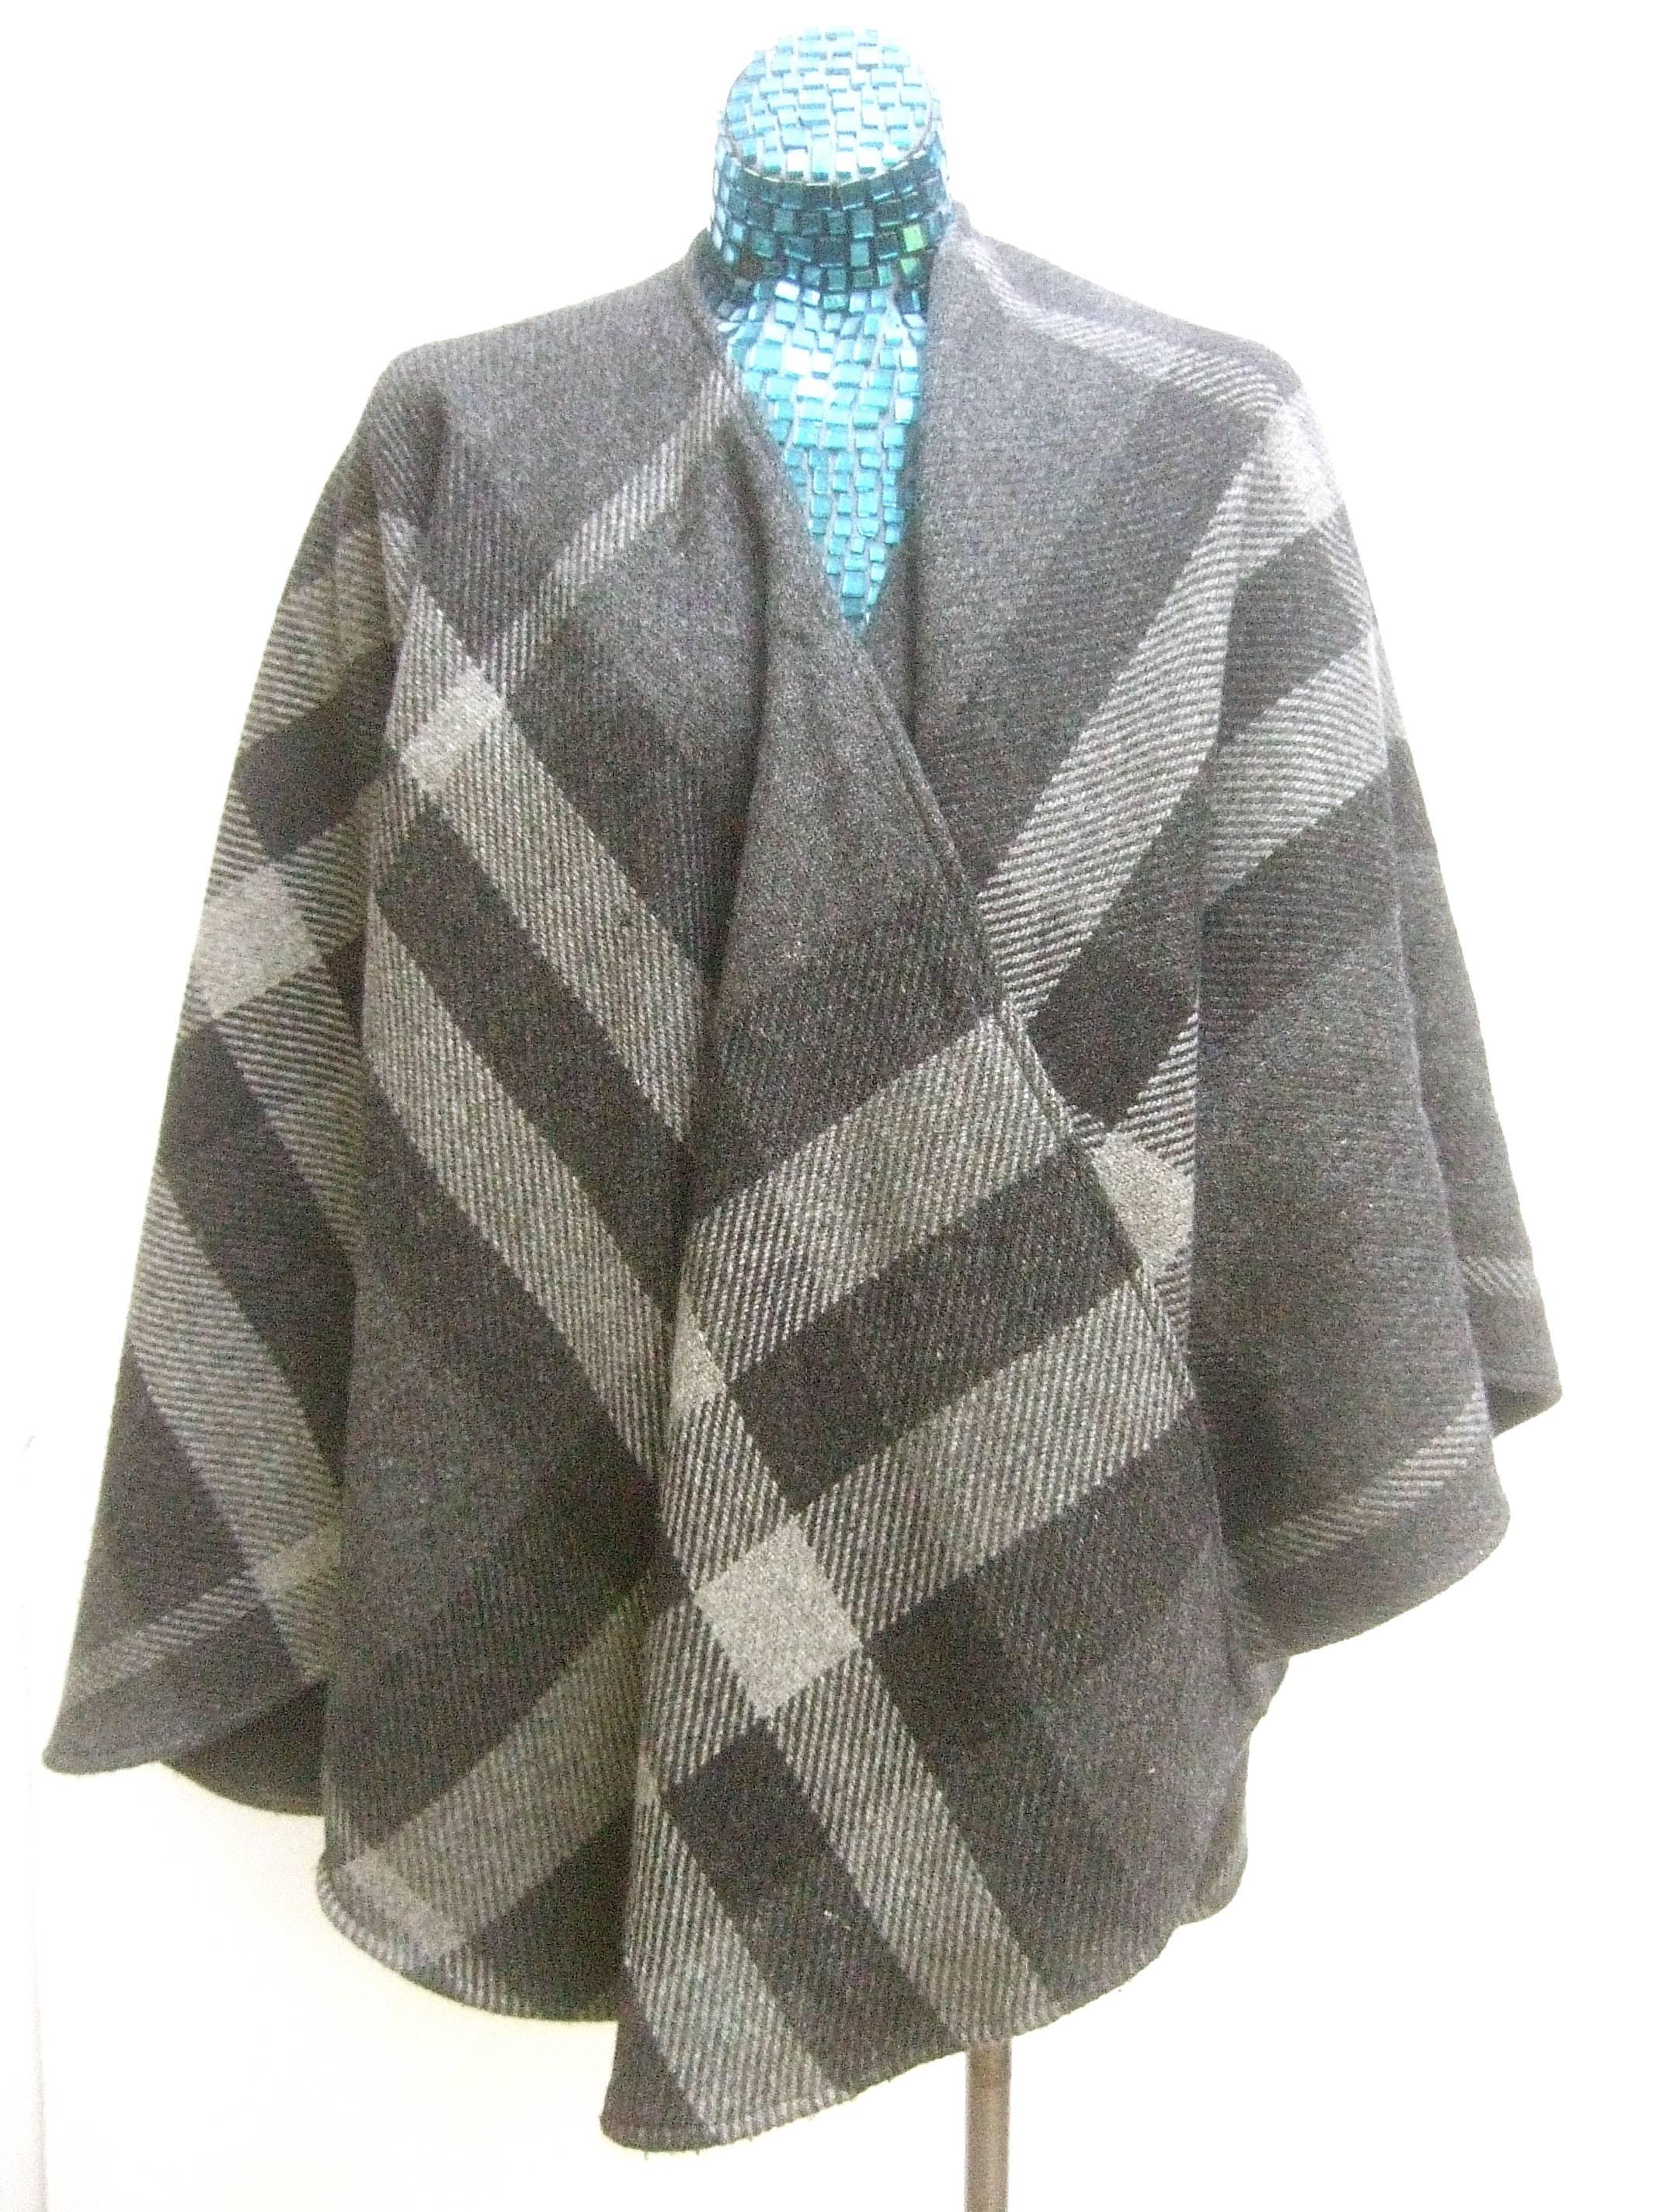 Burberry Stylish gray plaid wool shawl wrap 
The classic burberry shawl /cape is designed 
with various shades of gray hues 

The muted shades of gray plaid have
a quiet understated elegance 

Labeled: Burberry 

The loose silhouette crosses over